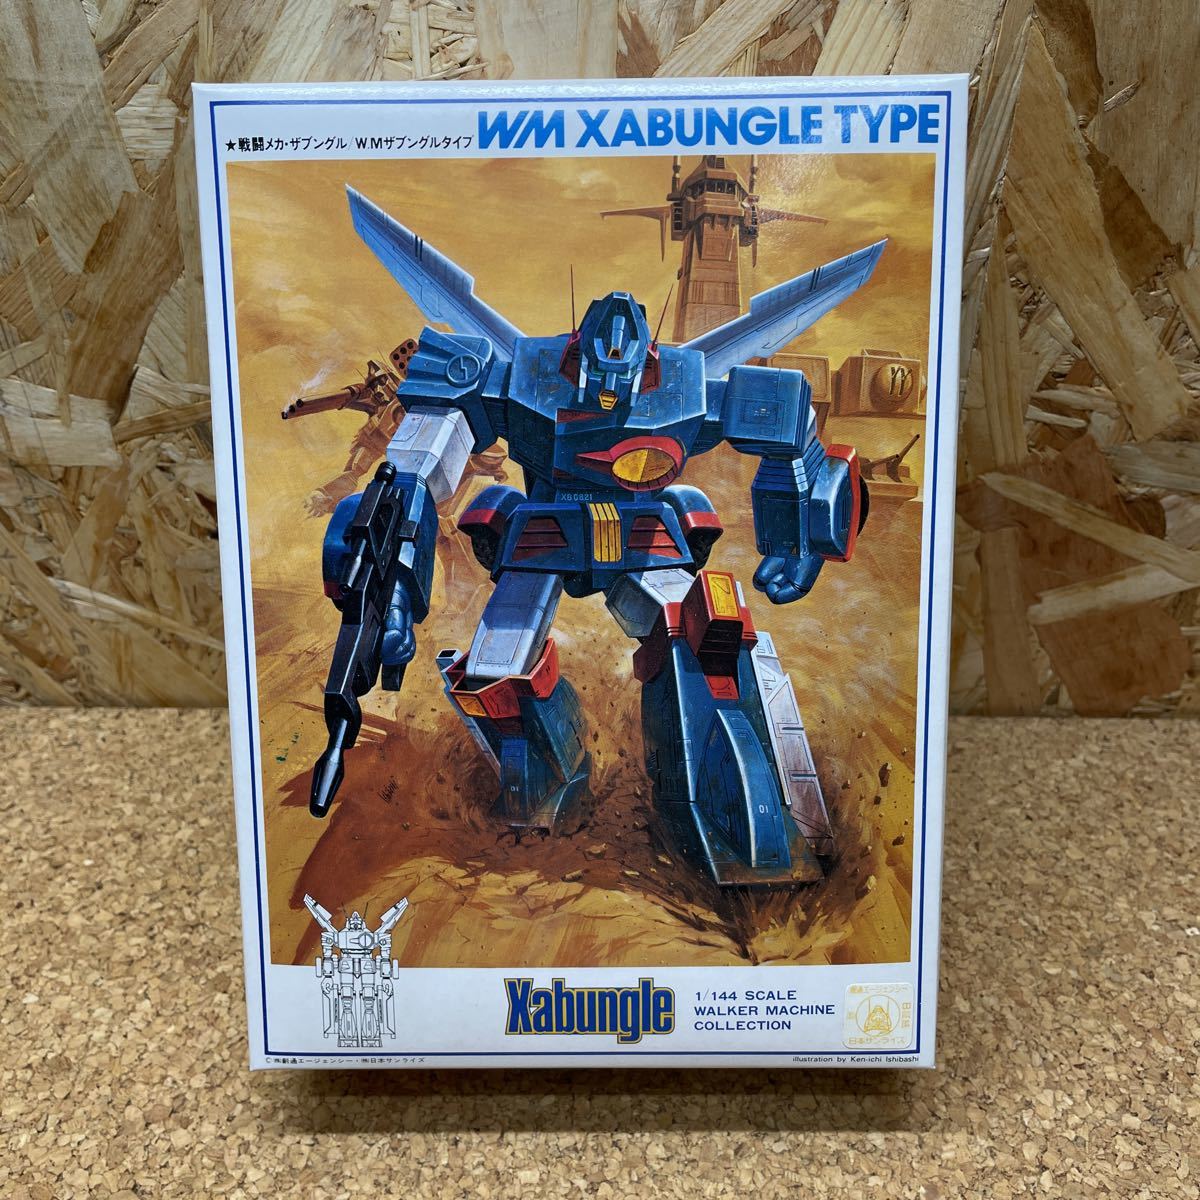 68 Bandai Blue Gale Xabungle 1/144 The bngru type instructions lack of not yet constructed including in a package un- possible outside fixed form shipping 